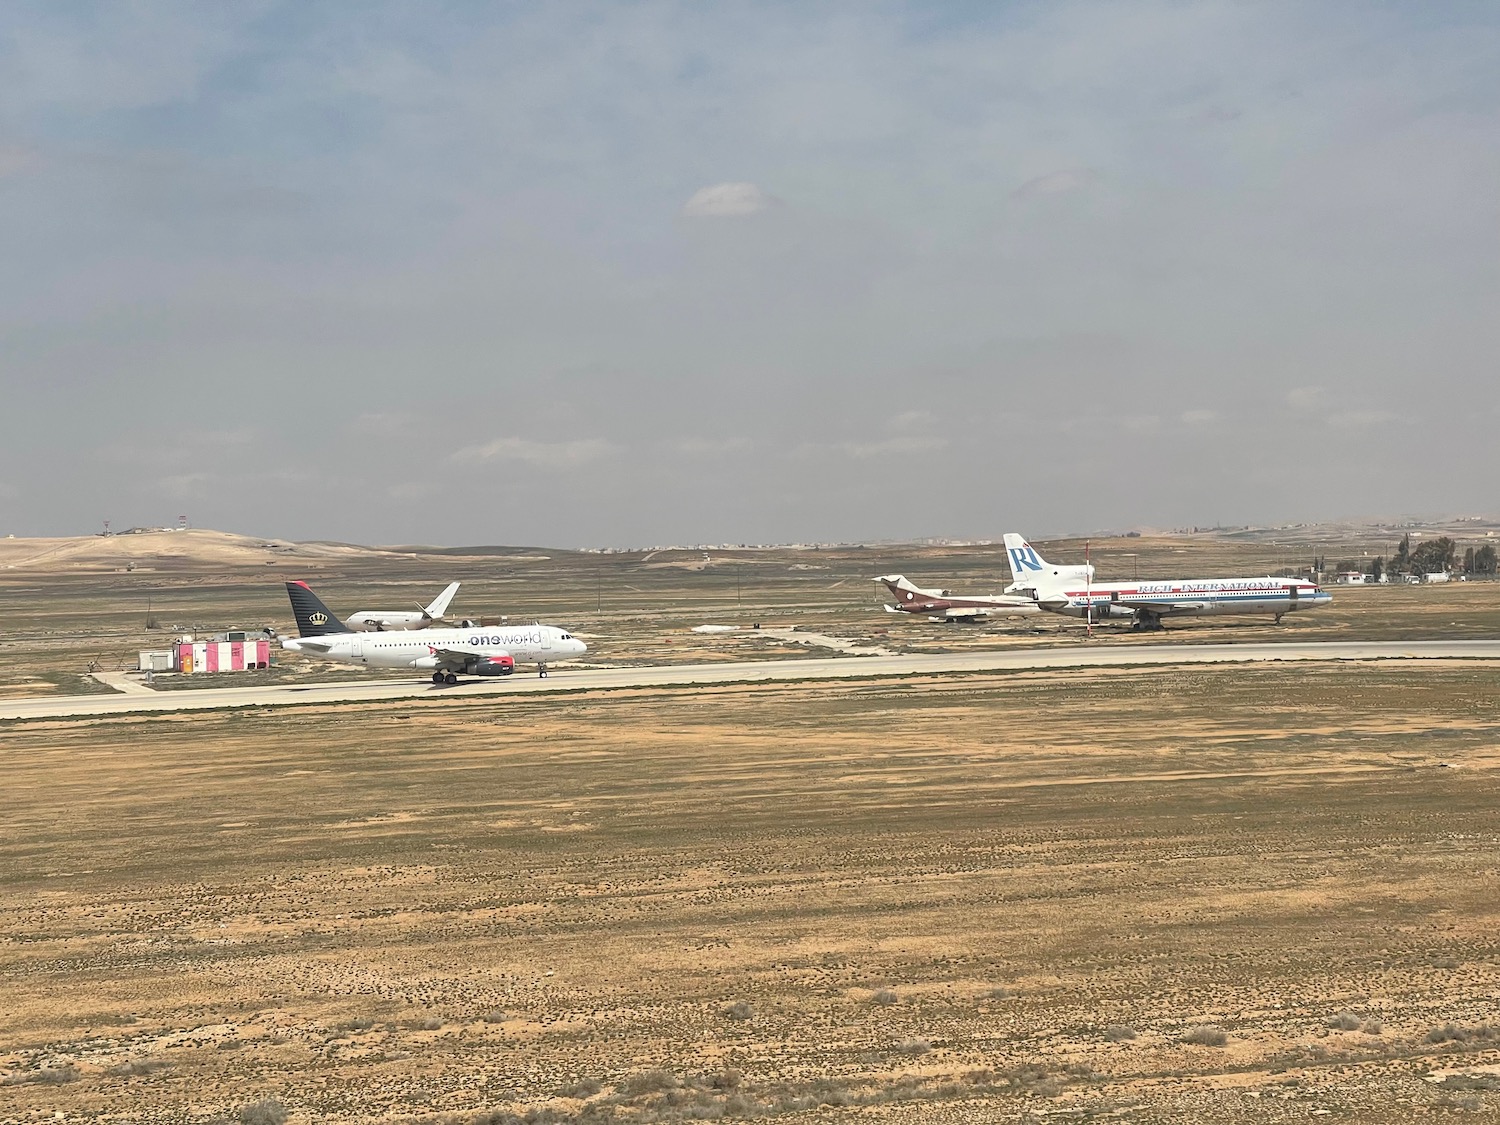 airplanes on a runway